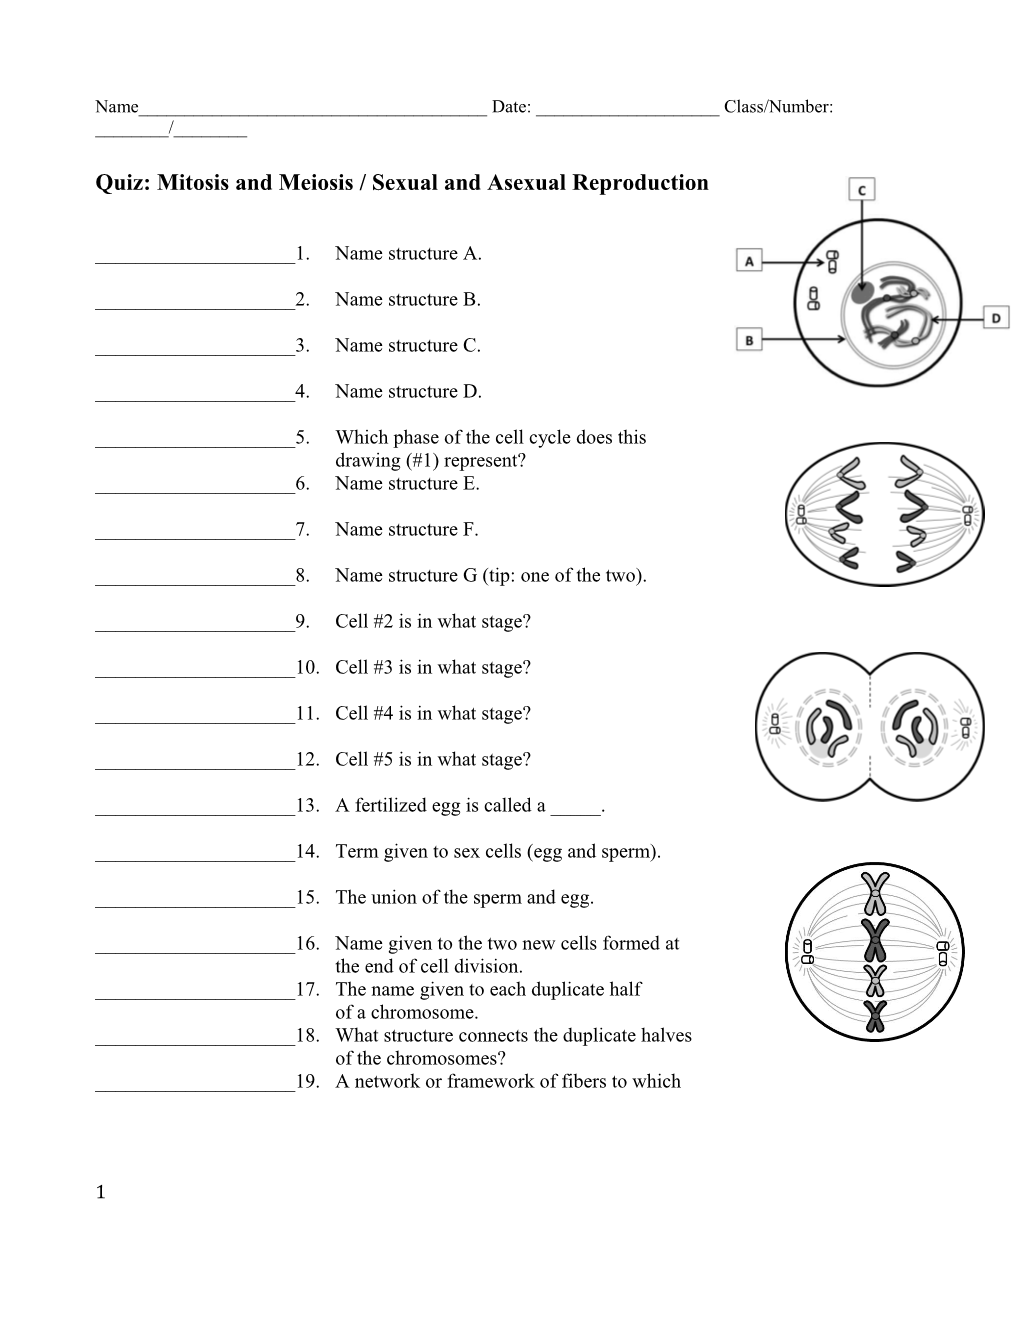 Quiz: Mitosis and Meiosis / Sexual and Asexual Reproduction